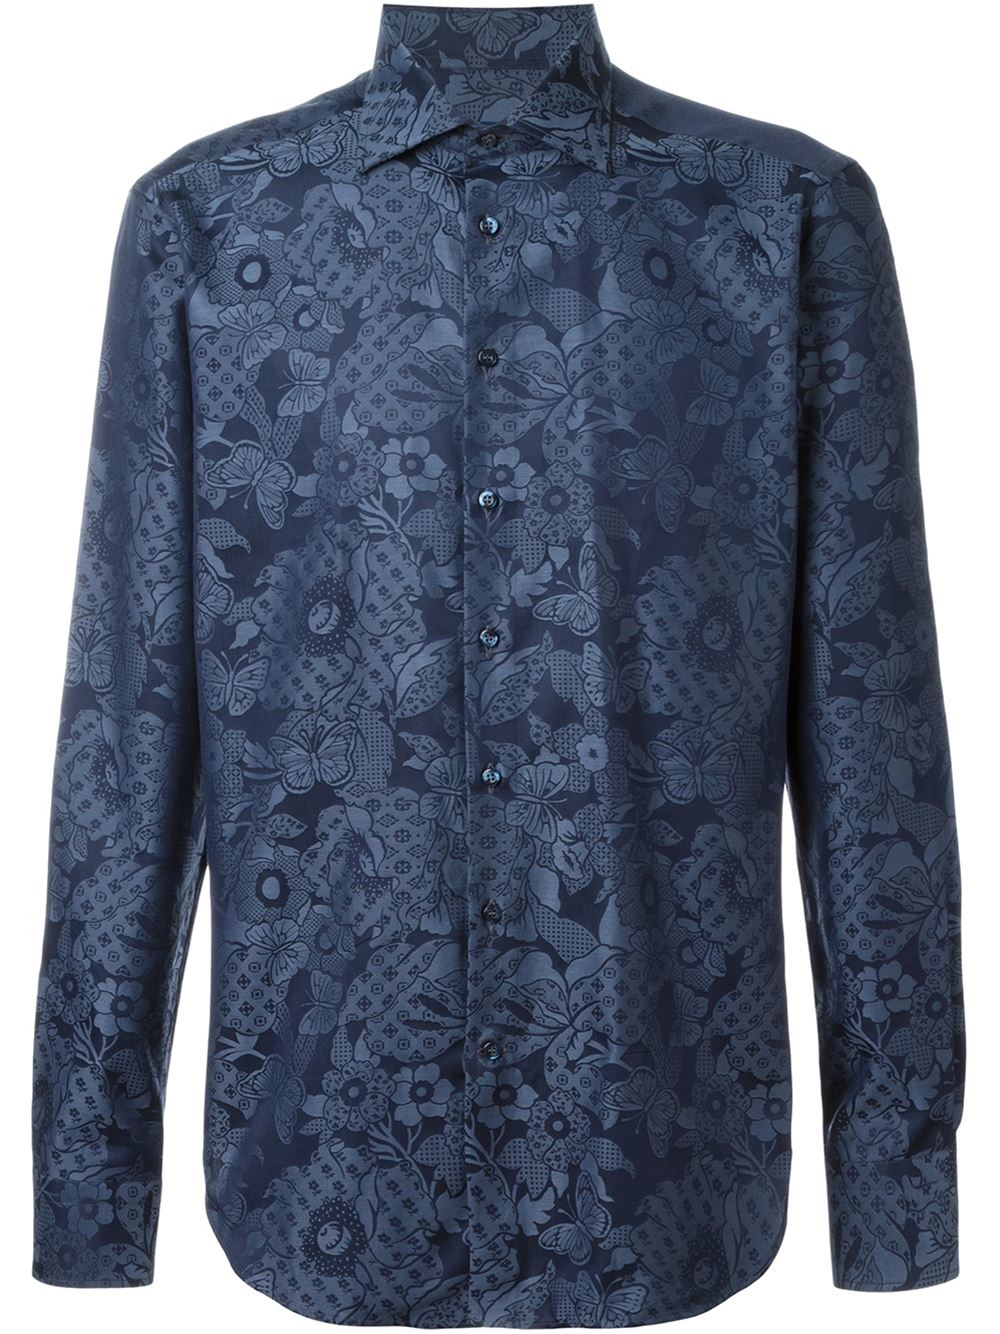 Lyst - Etro Floral Jacquard Shirt in Blue for Men